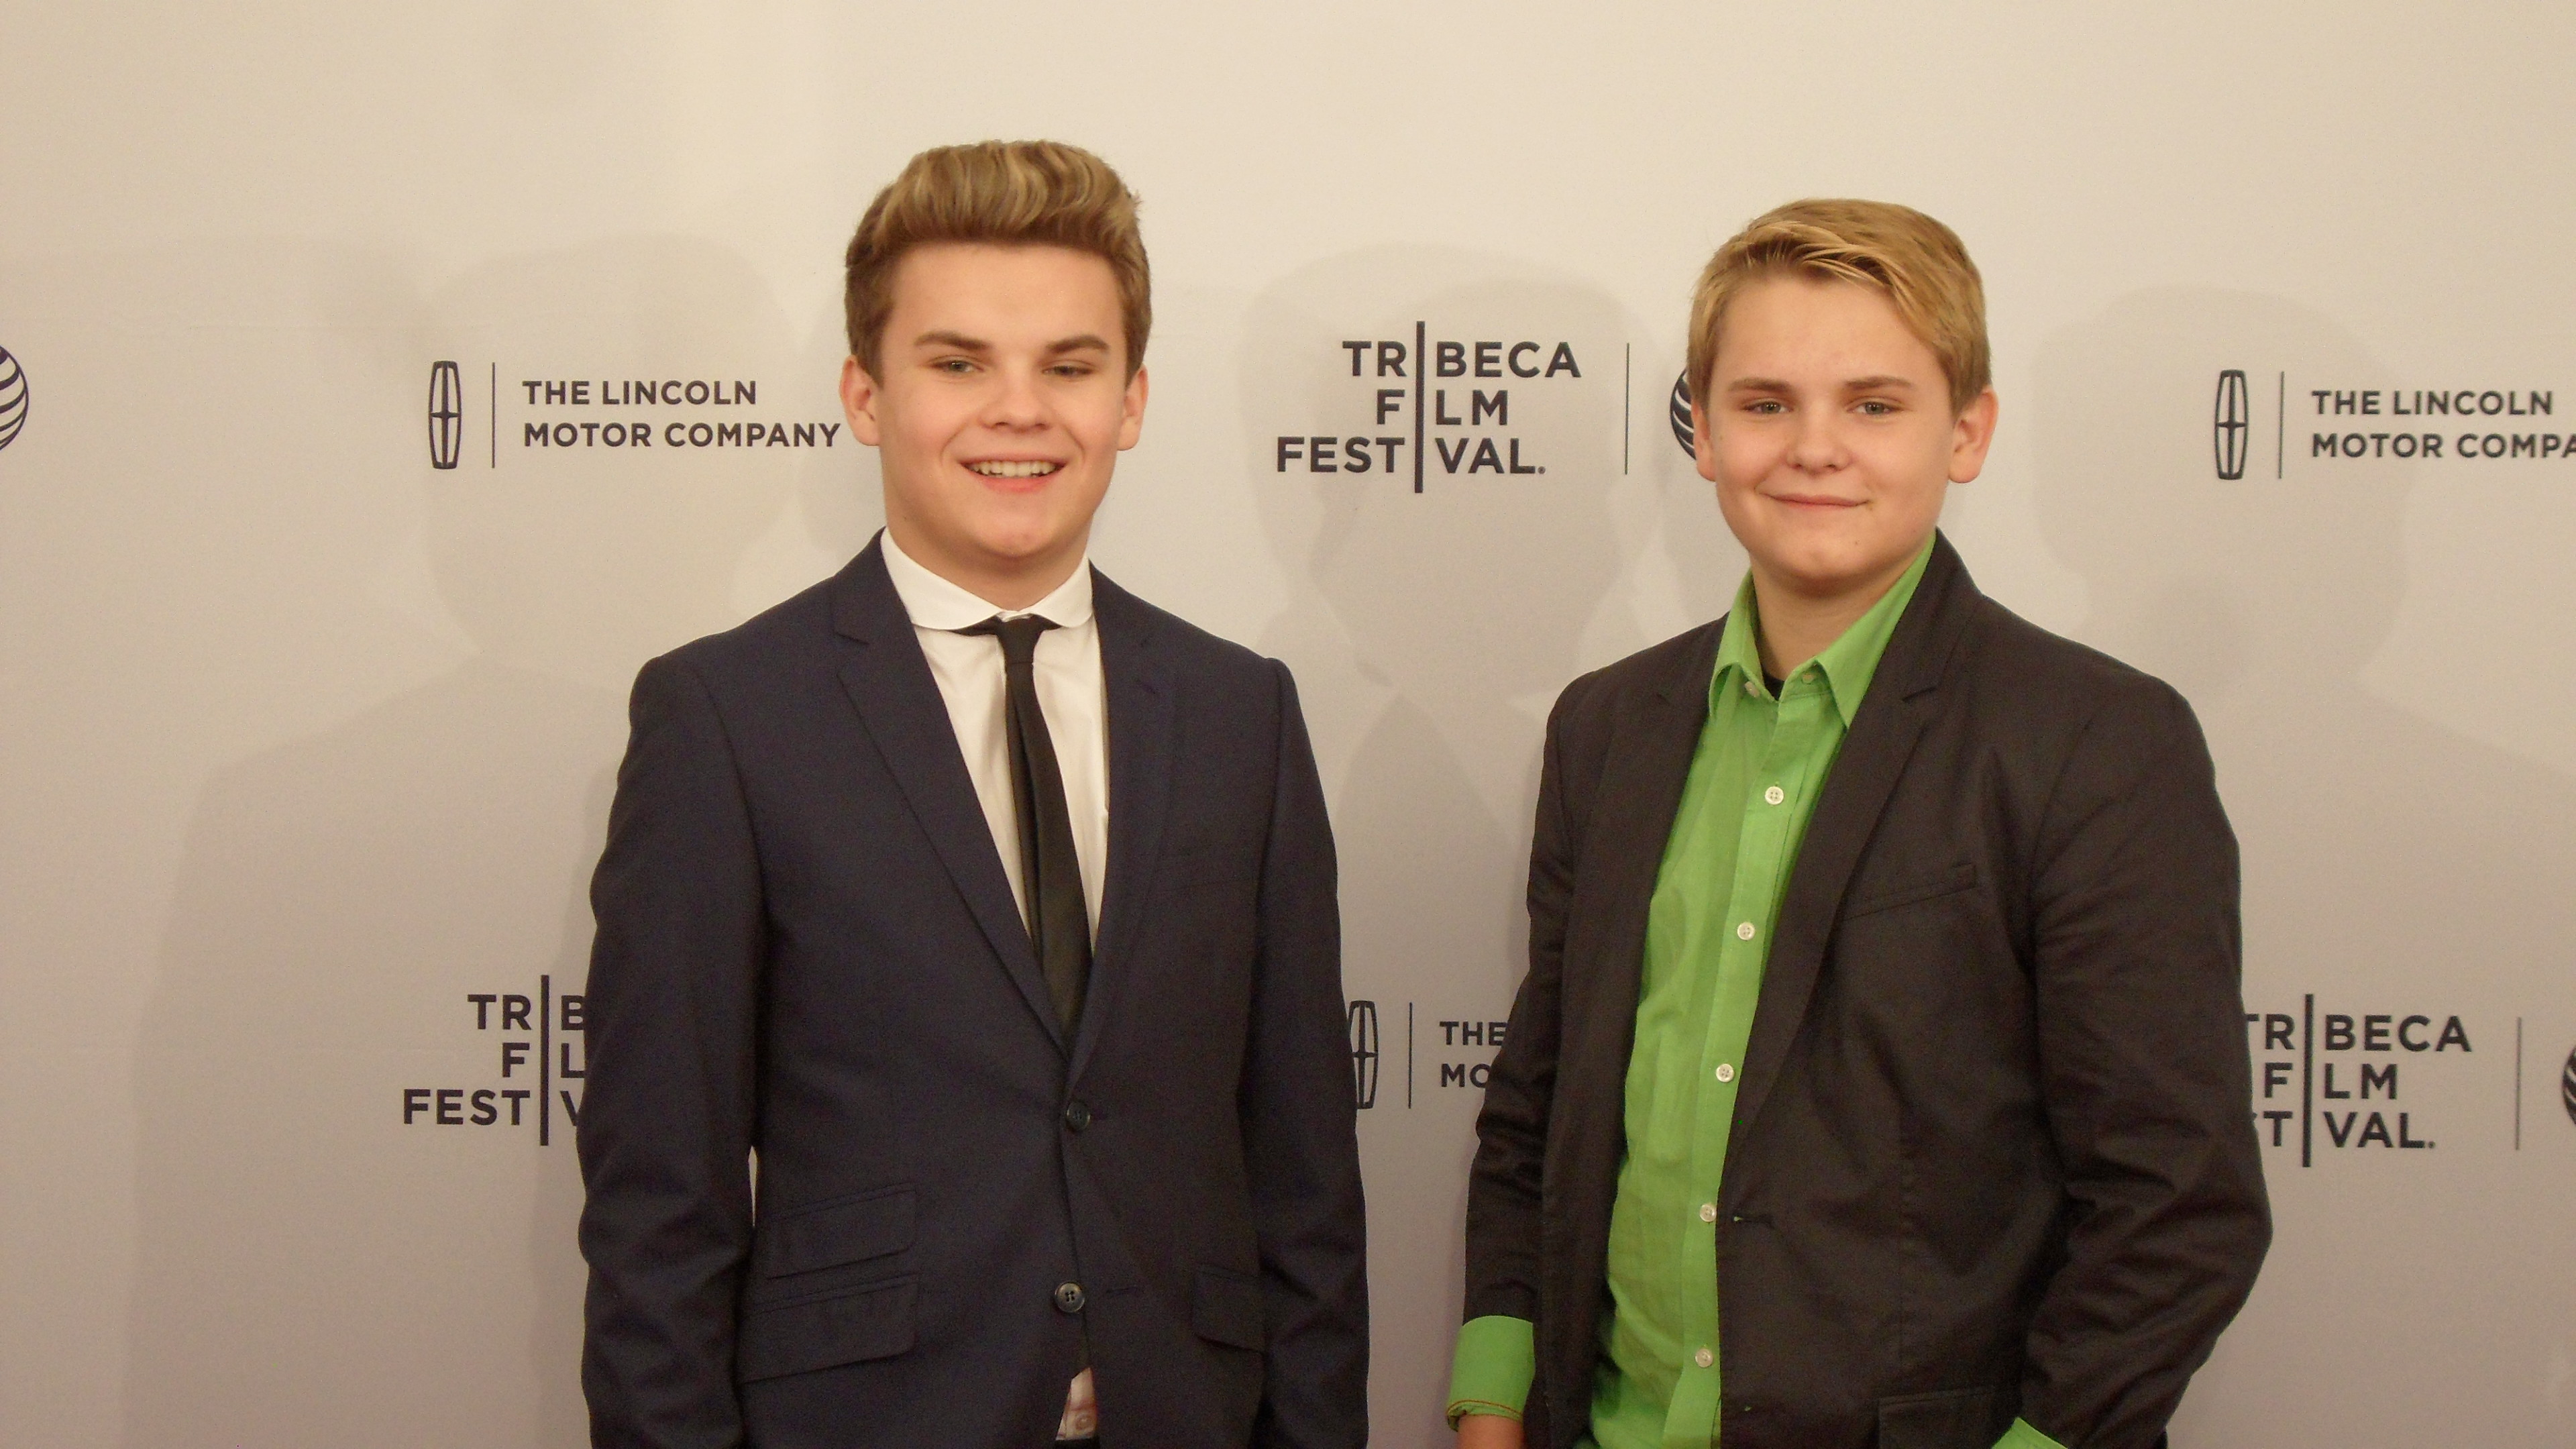 Reese Hartwig and his brother Ryan at the New York Tribeca Film Festival on 24 April at the premiere of Just Before I Go directed by Courtney Cox